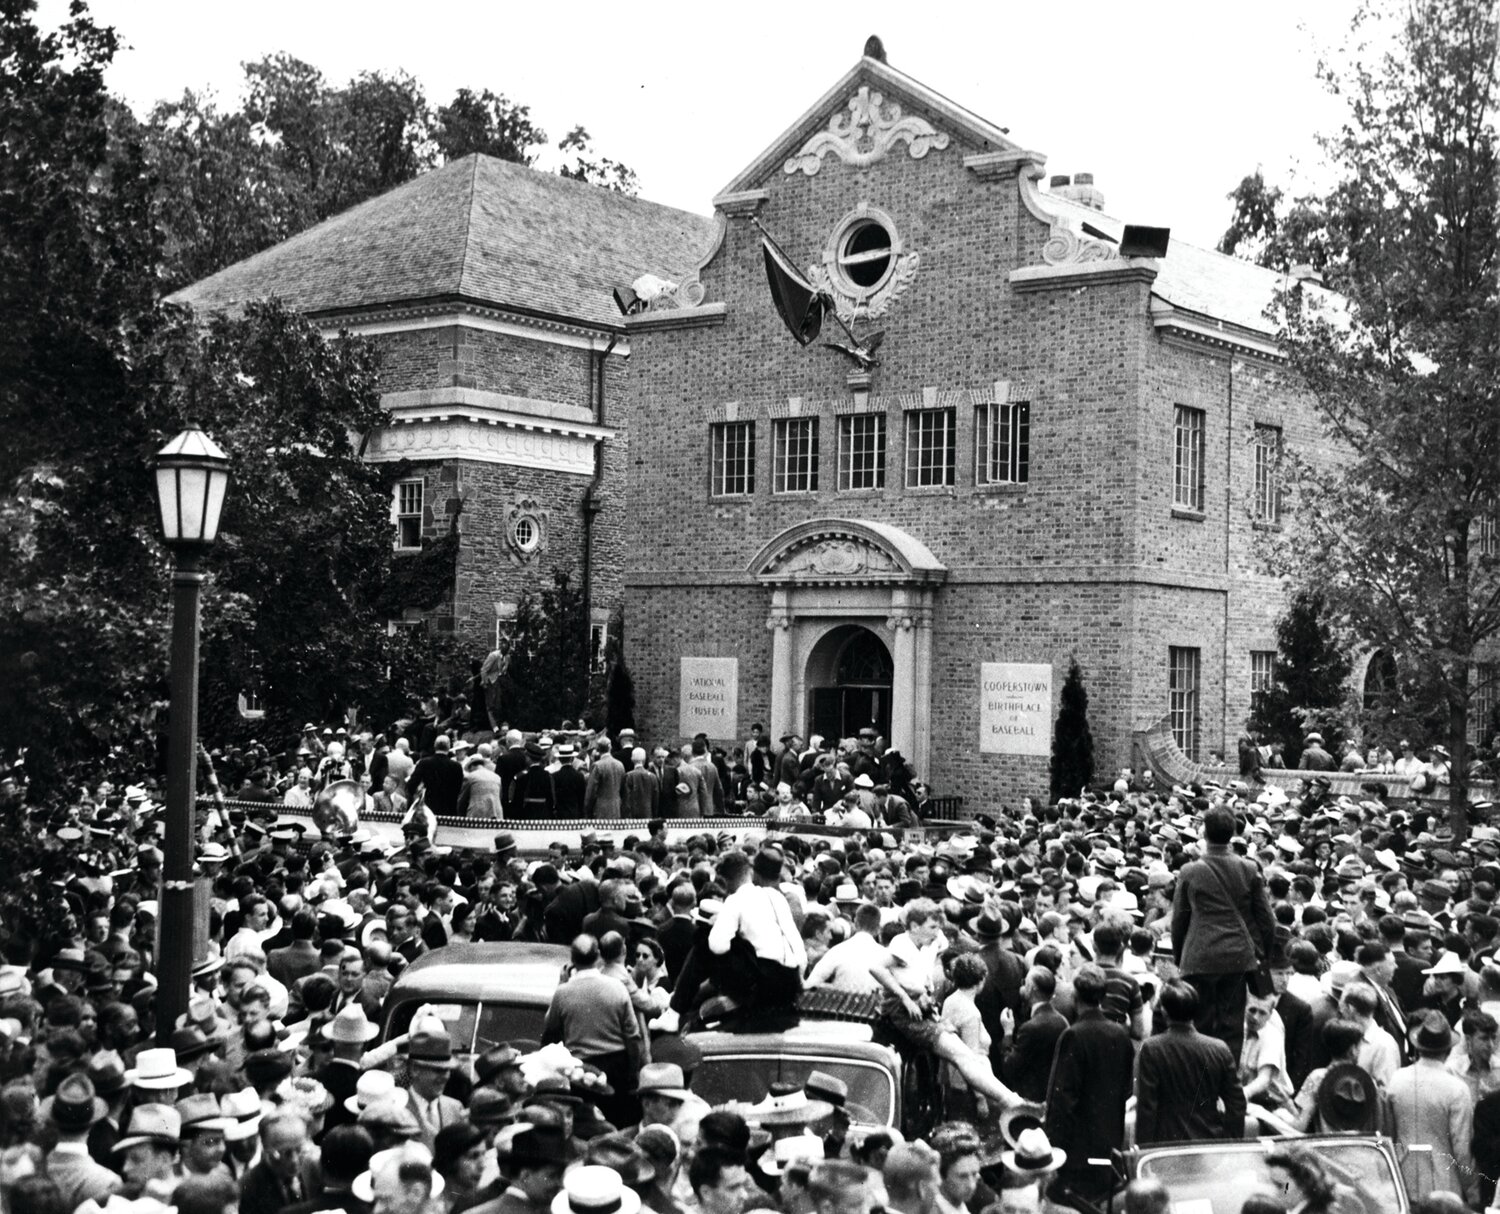 Opening Day of The National Baseball Hall of Fame in June 1939.